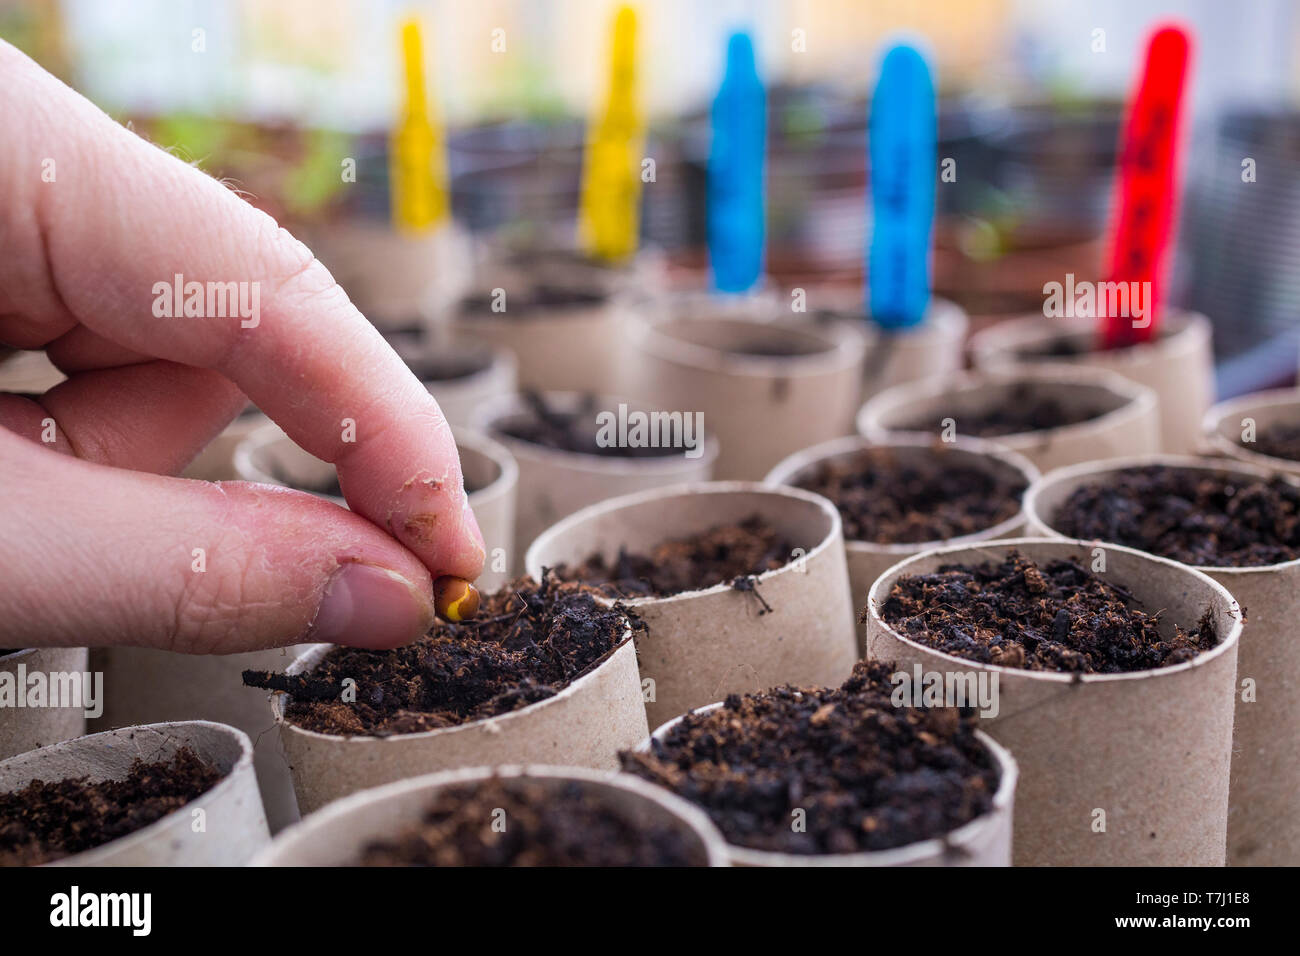 Sowing Sweet Pea seeds in toilet roll tubes Stock Photo